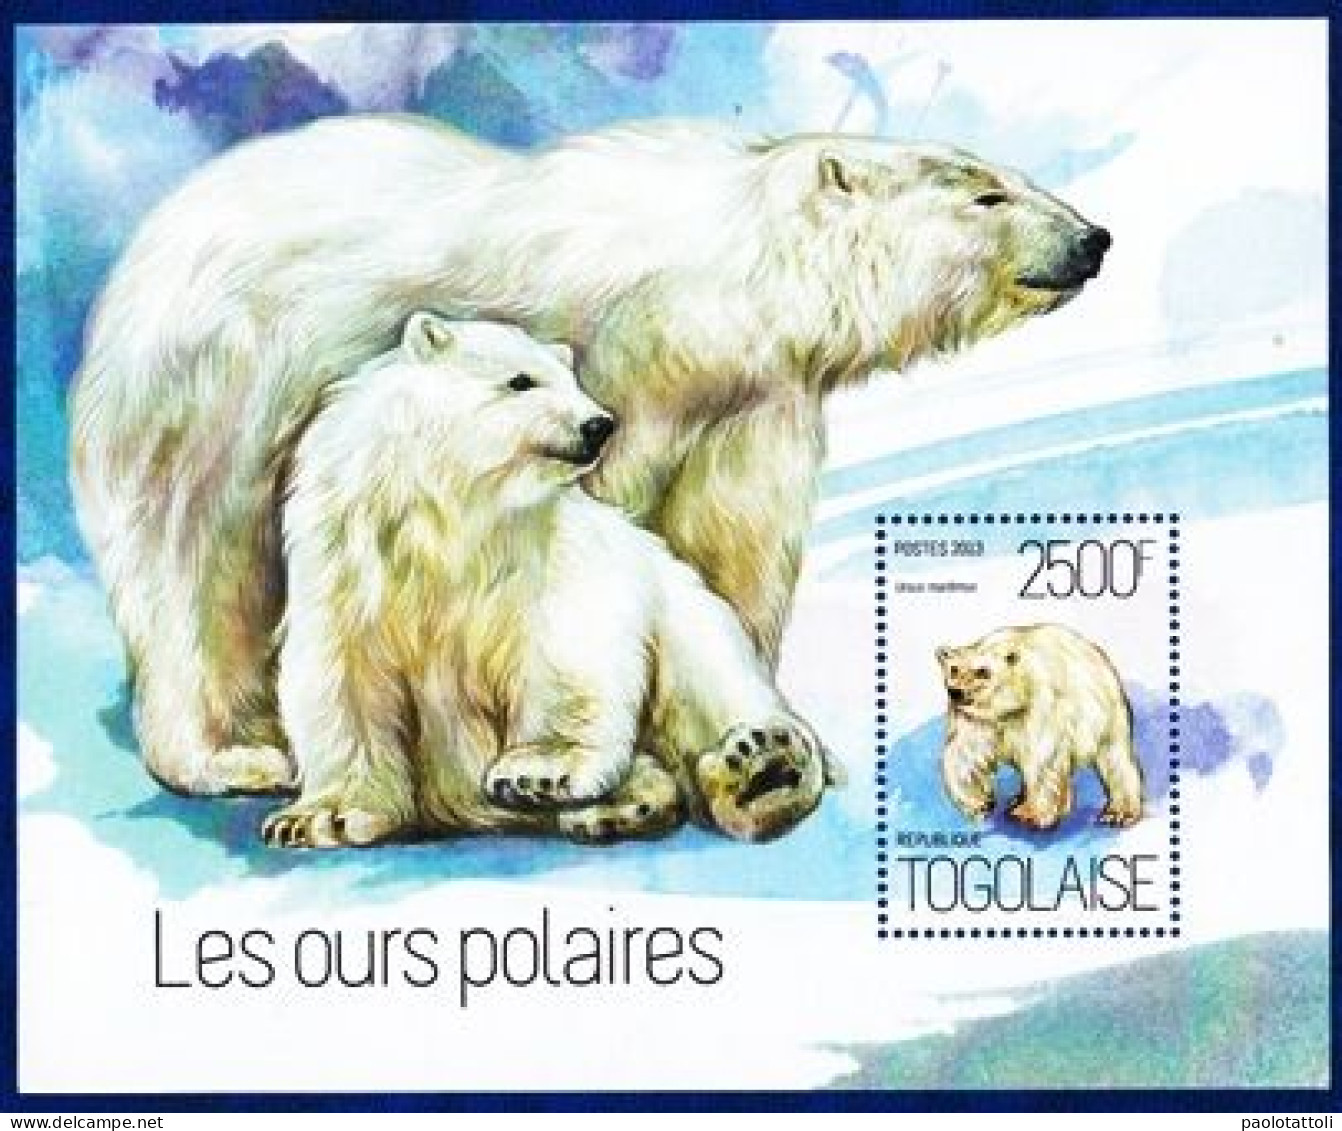 Togo, 2013- Les Ours Polaires-2500F- Block NewNH - Ours